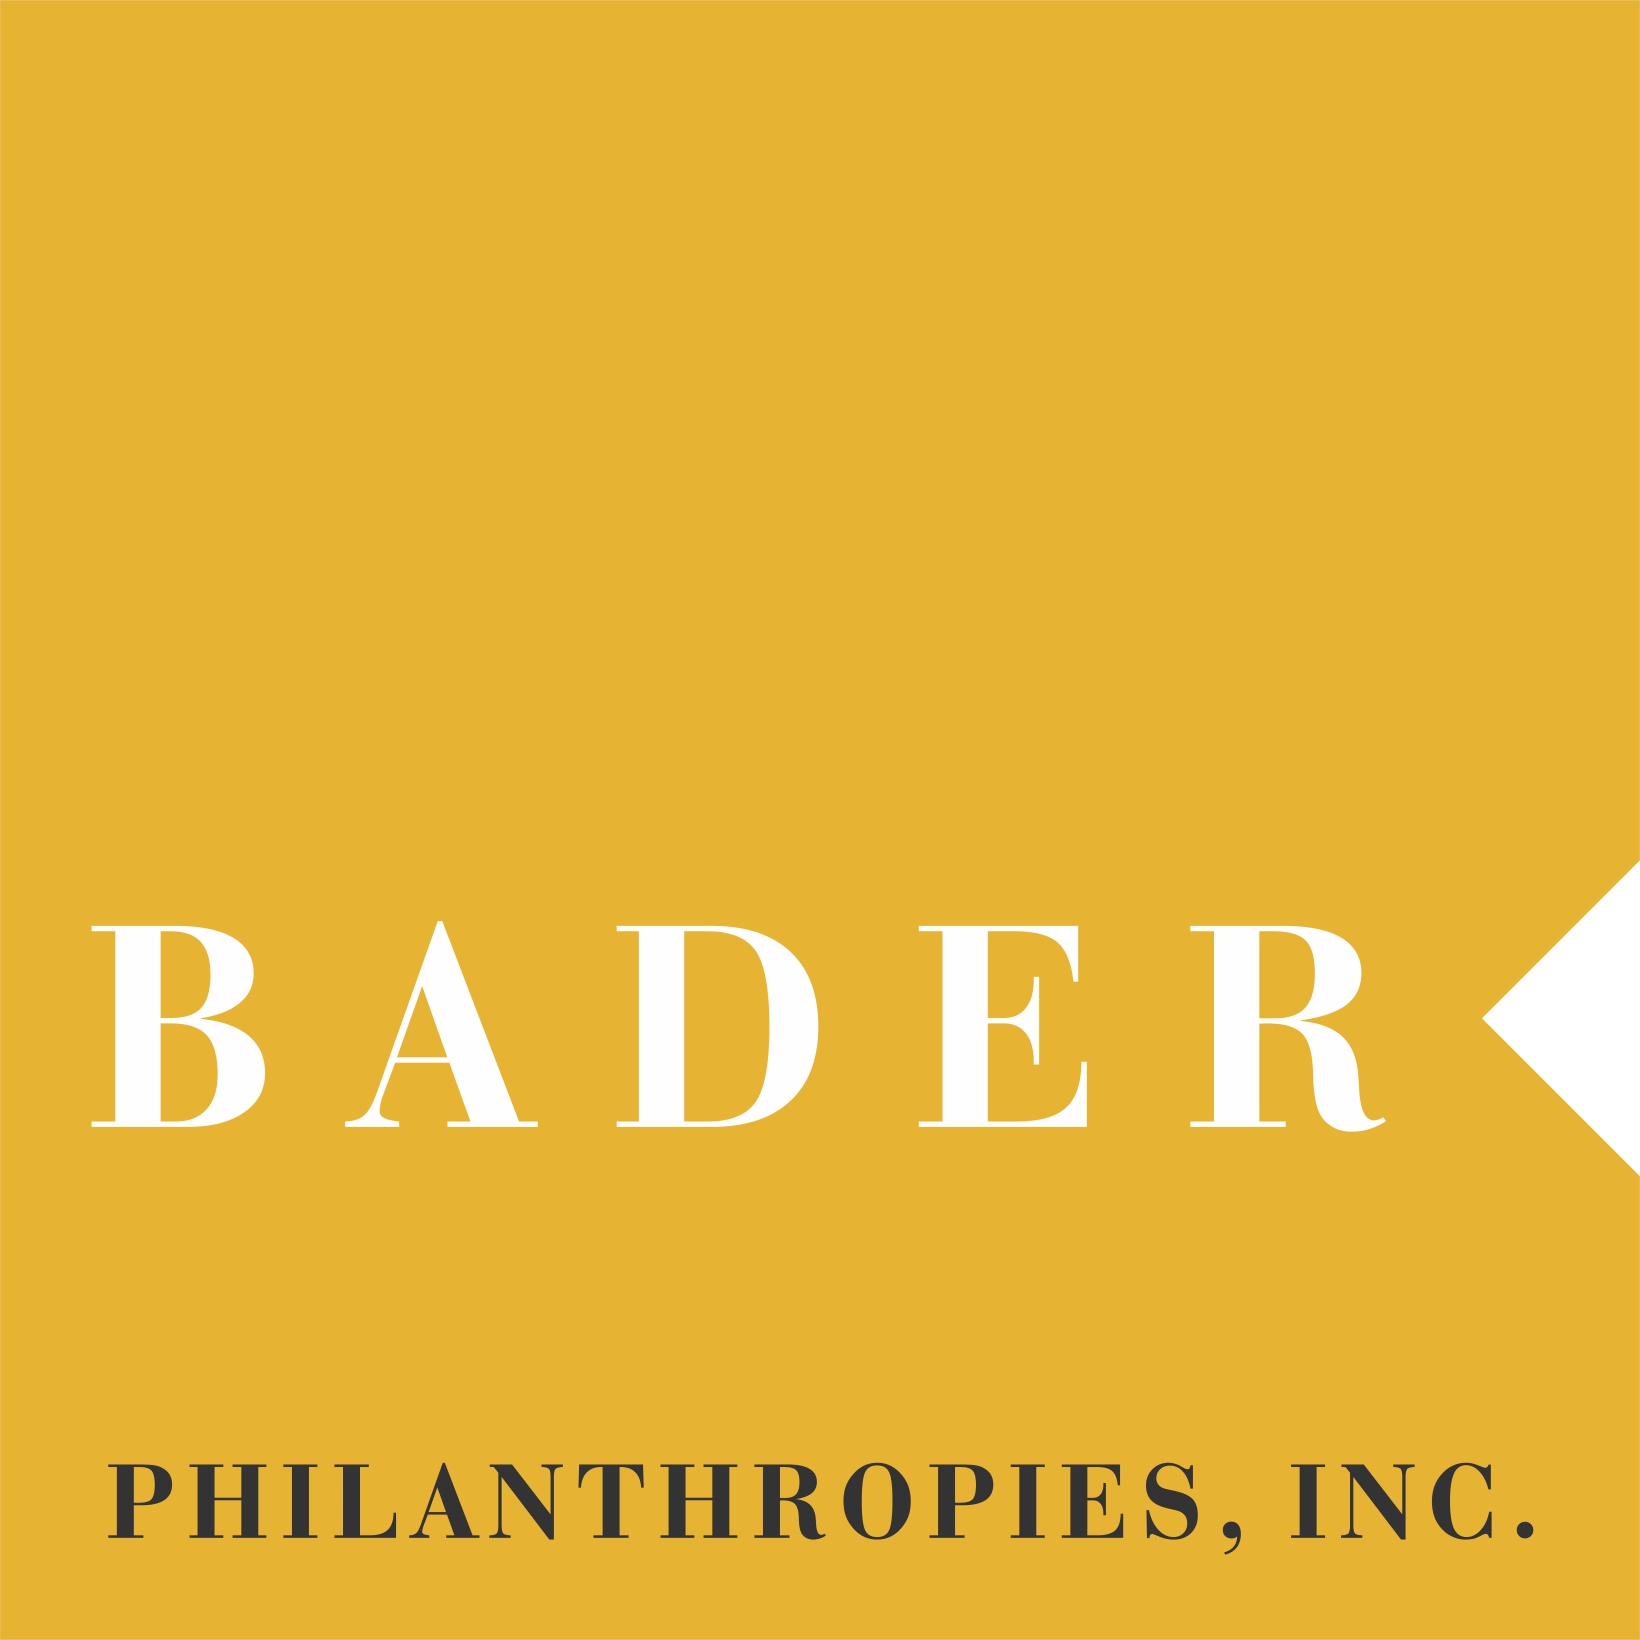 Bader Philanthropies, Inc., Brewers Community Foundation, Eppstein Uhen Architects, George Karl Foundation, PNC, and Southwest Airlines